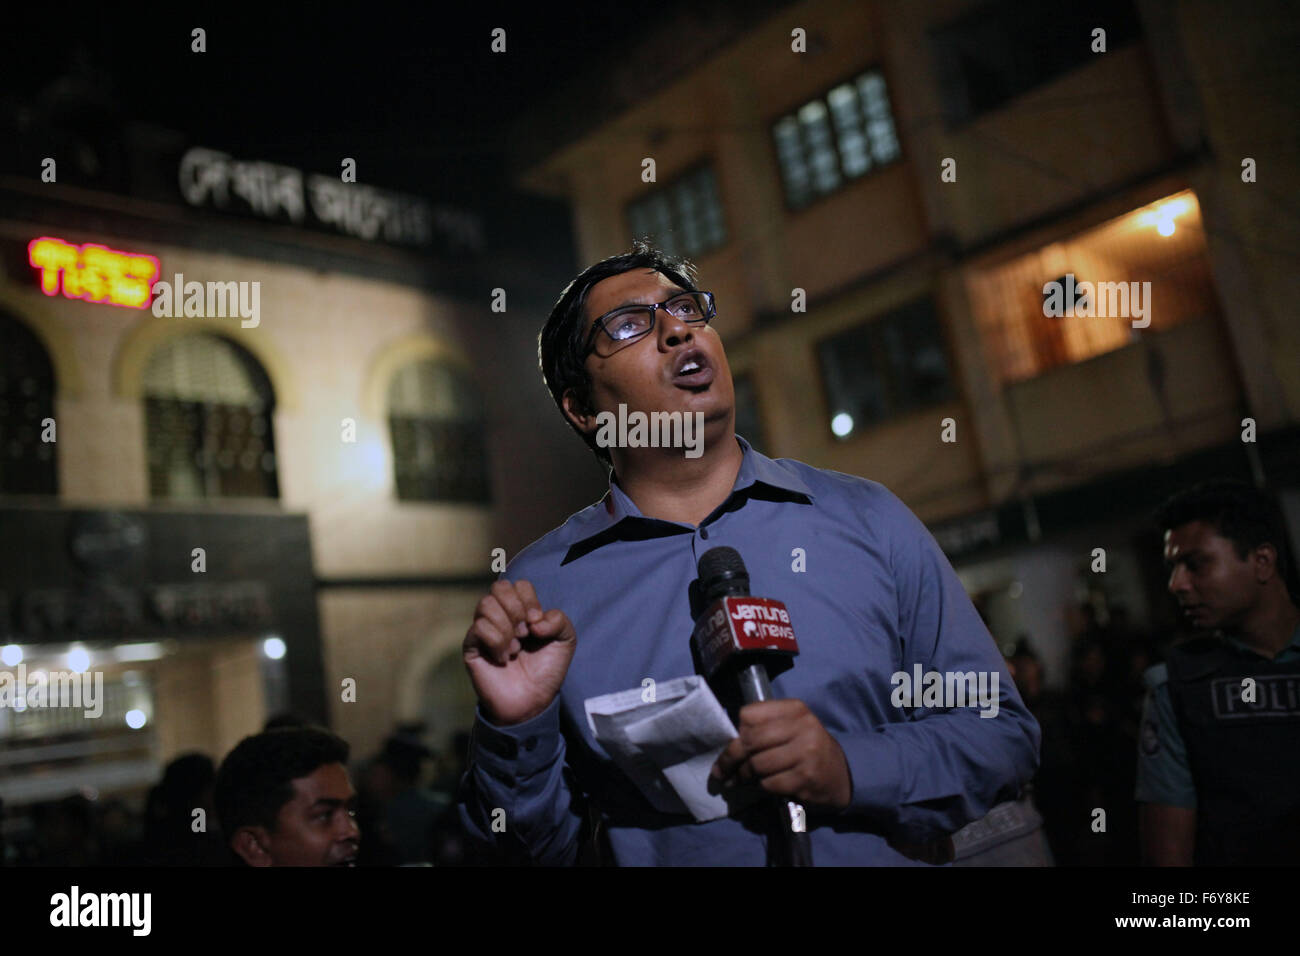 Dhaka, Bangladesh. 22nd November: Media busy to covering war criminals Salauddin Quader Chowdhury and Ali Ahsan Muhammad Mojaheed's death execution in front of Dhaka Central Gate in Dhaka on November 22, 2015. Two war criminals, BNP leader Salauddin Quader Chowdhury and Jamaat-e-Islami secretary general Ali Ahsan Mohammad Mojaheed, have been executed at the same time for their crimes committed against humanity in 1971, says jail official. They were executed by hanging at 12:55am Sunday at Dhaka Central Jail, said Inspector General of Prison Syed Iftekhar Uddin. Both of them were handed down de Stock Photo